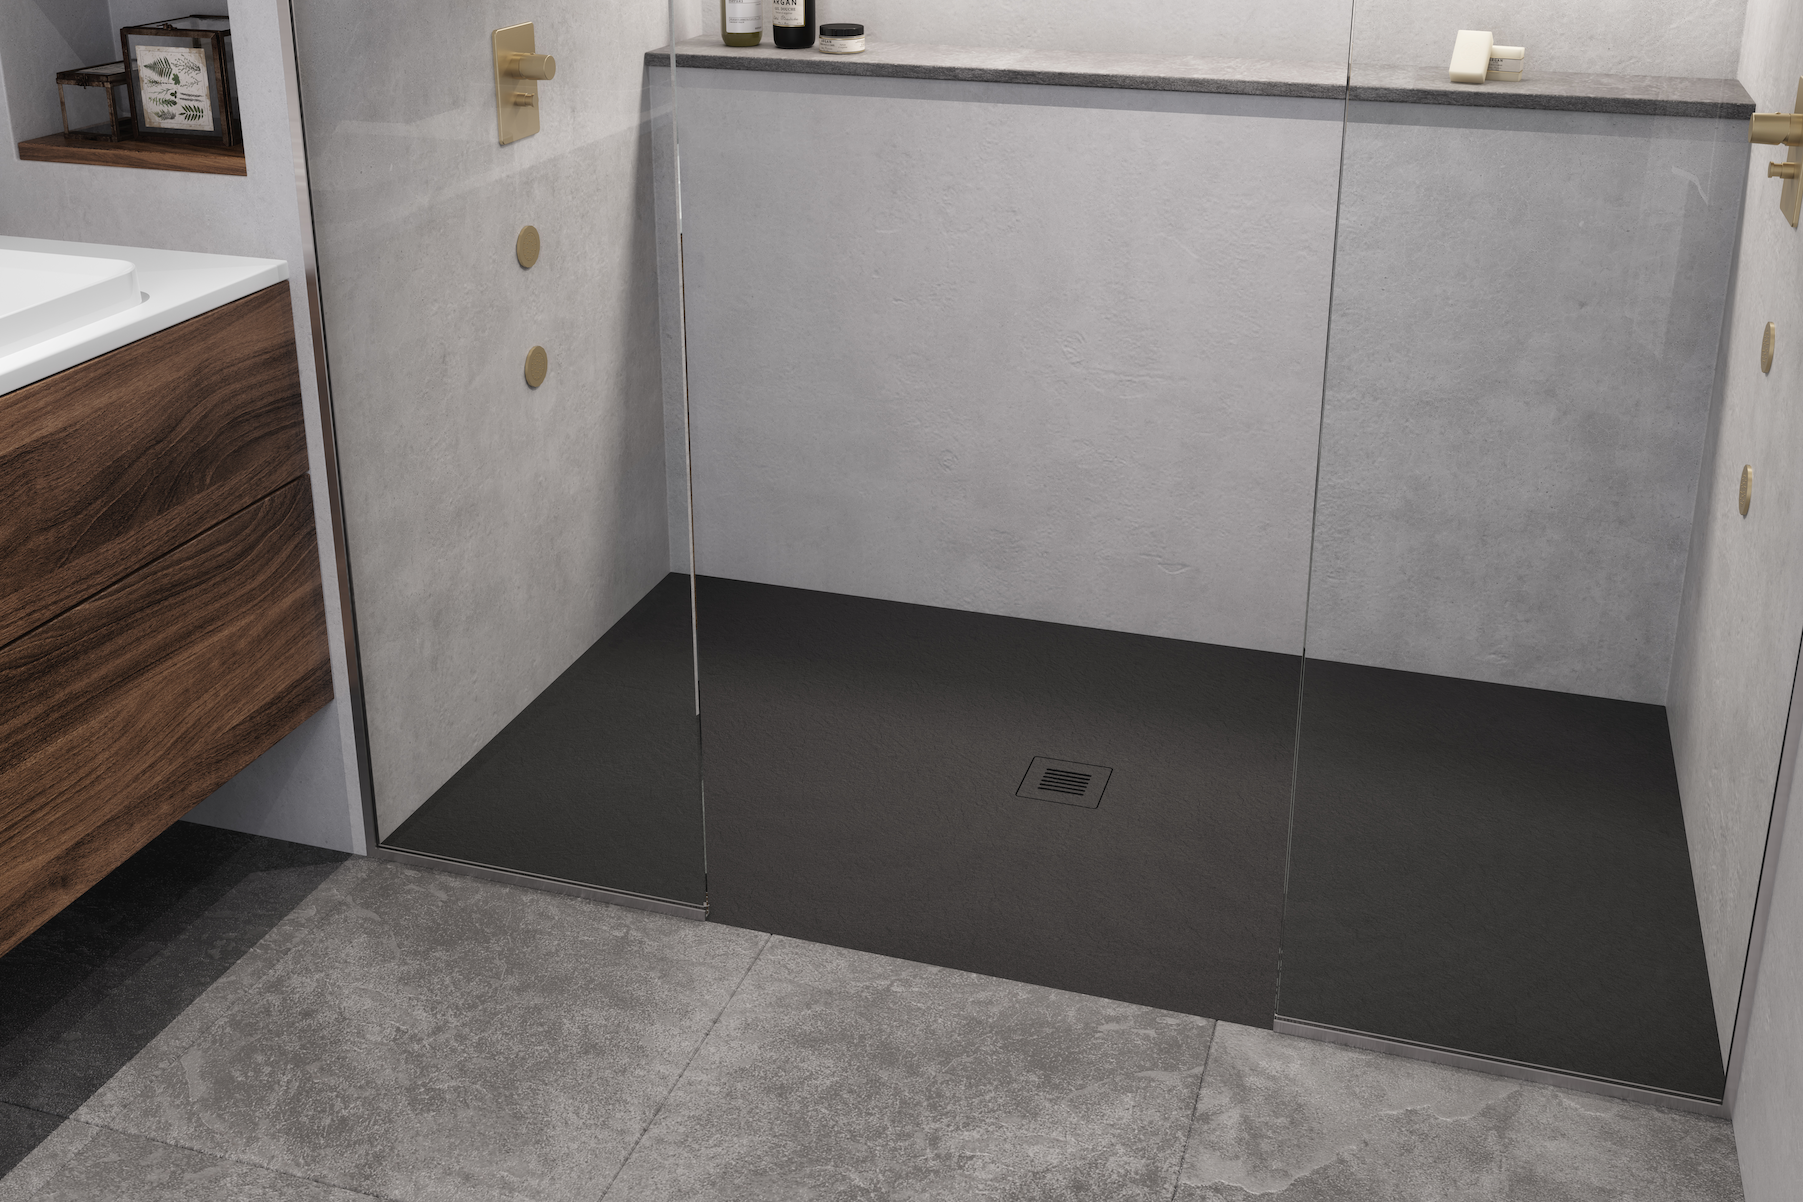 Barrier Free Corner Shower - Three piece 60x48 - Real Tile Look